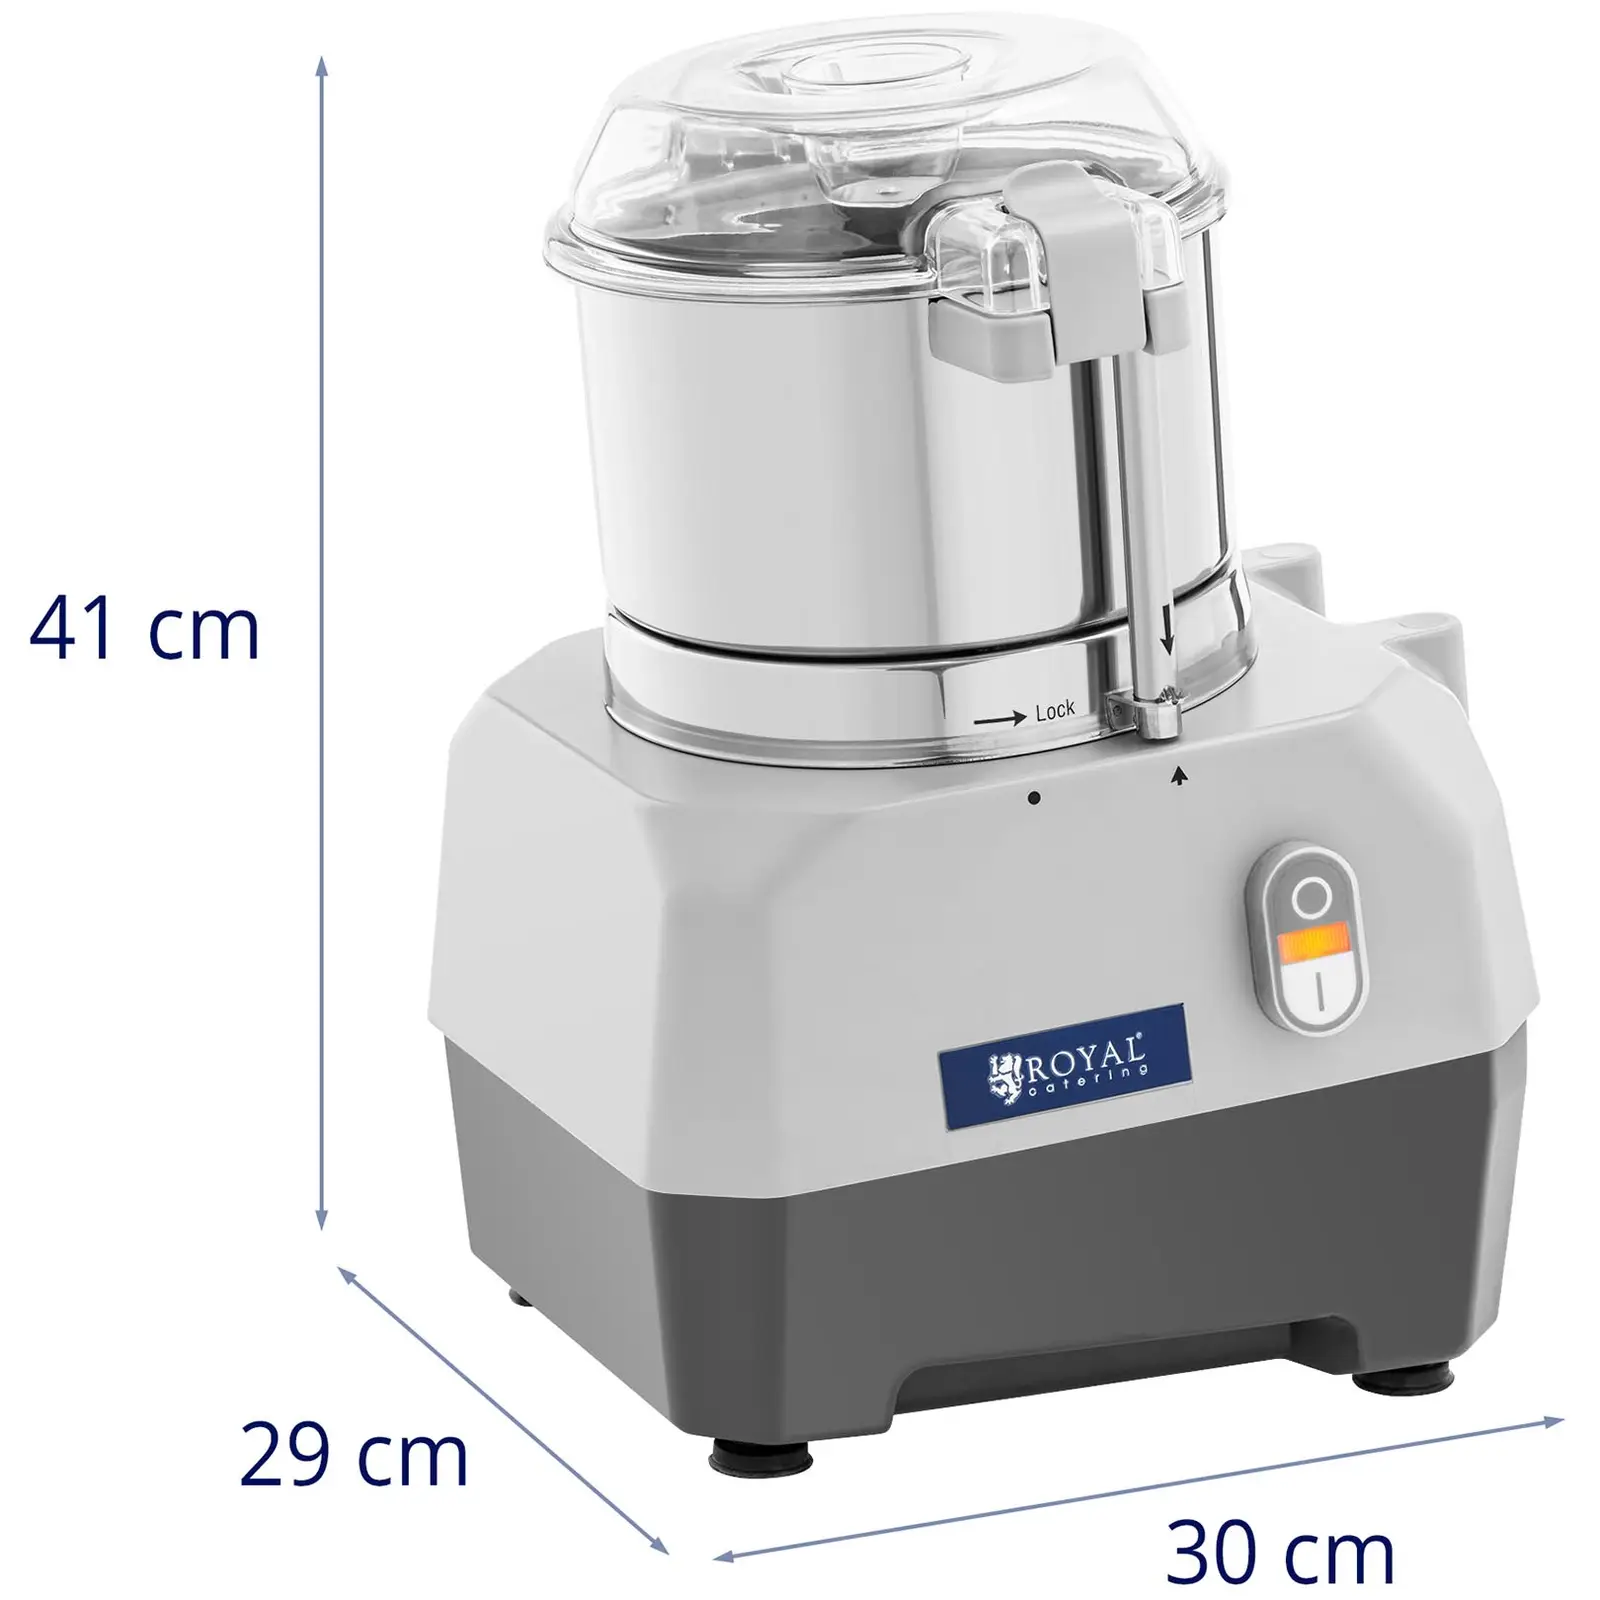 Foodprosessor - 1500 rpm - 3 L - Royal Catering